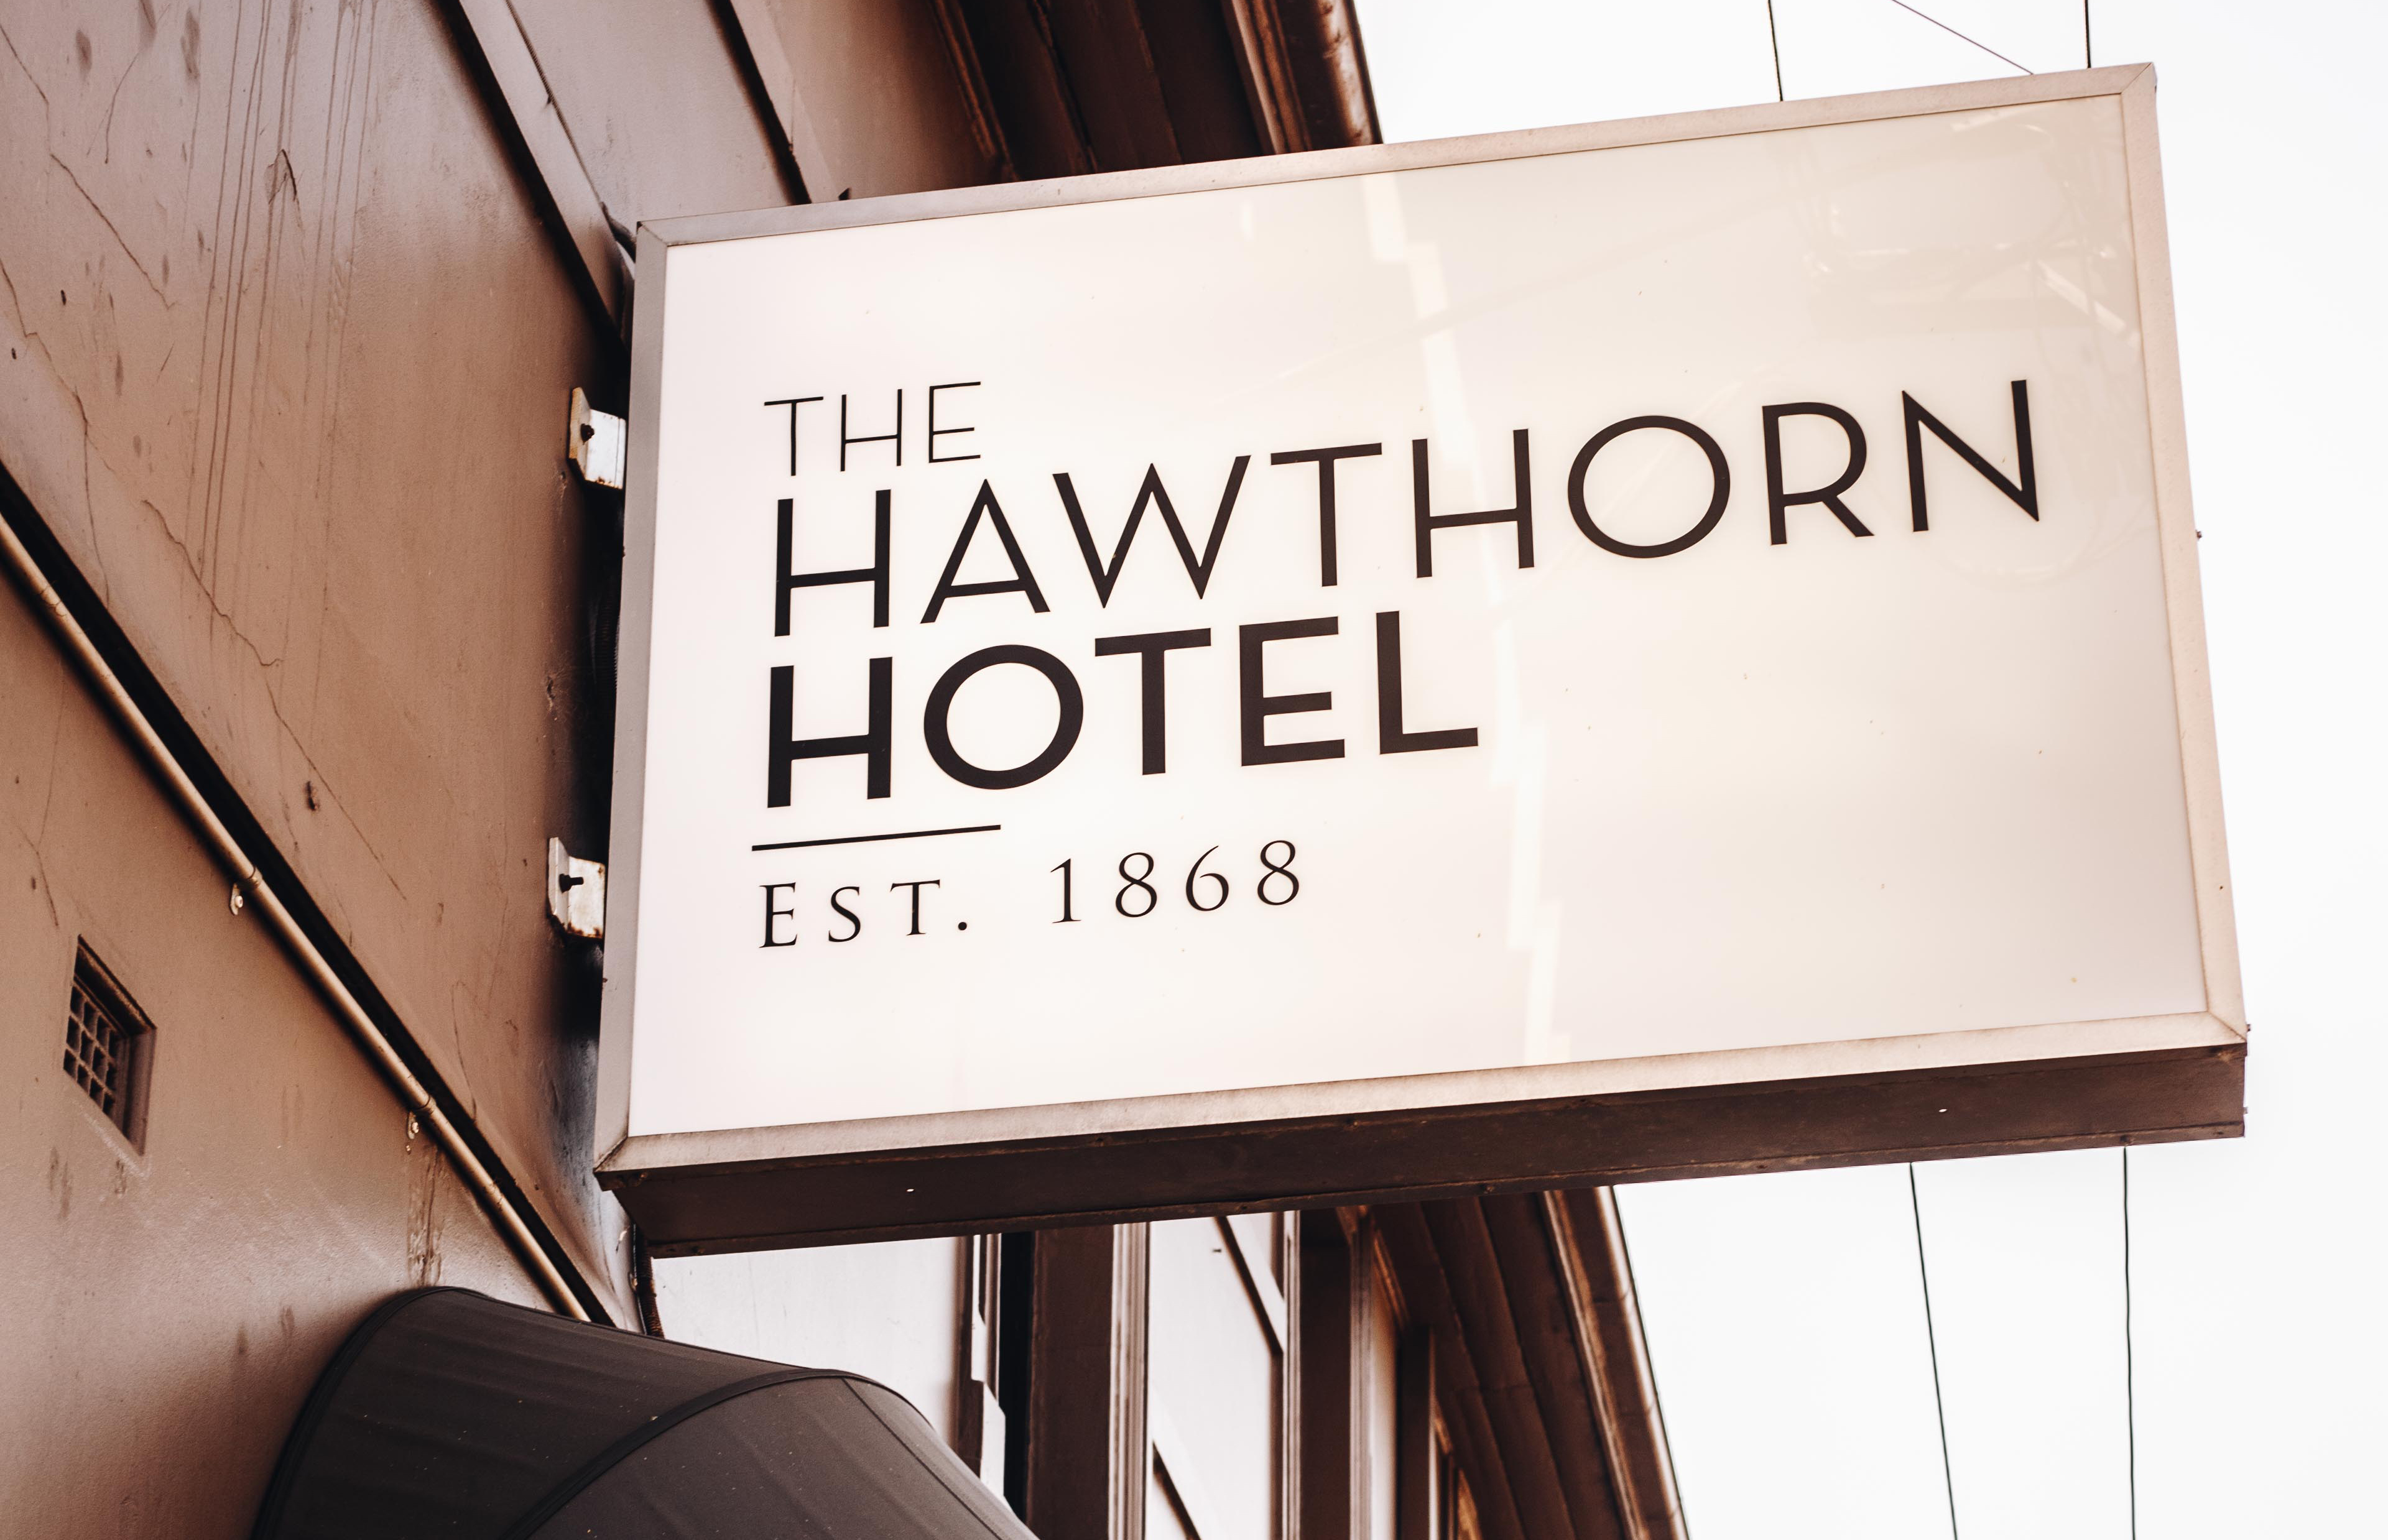 The Hawthorn Hotel is coming back in 2021